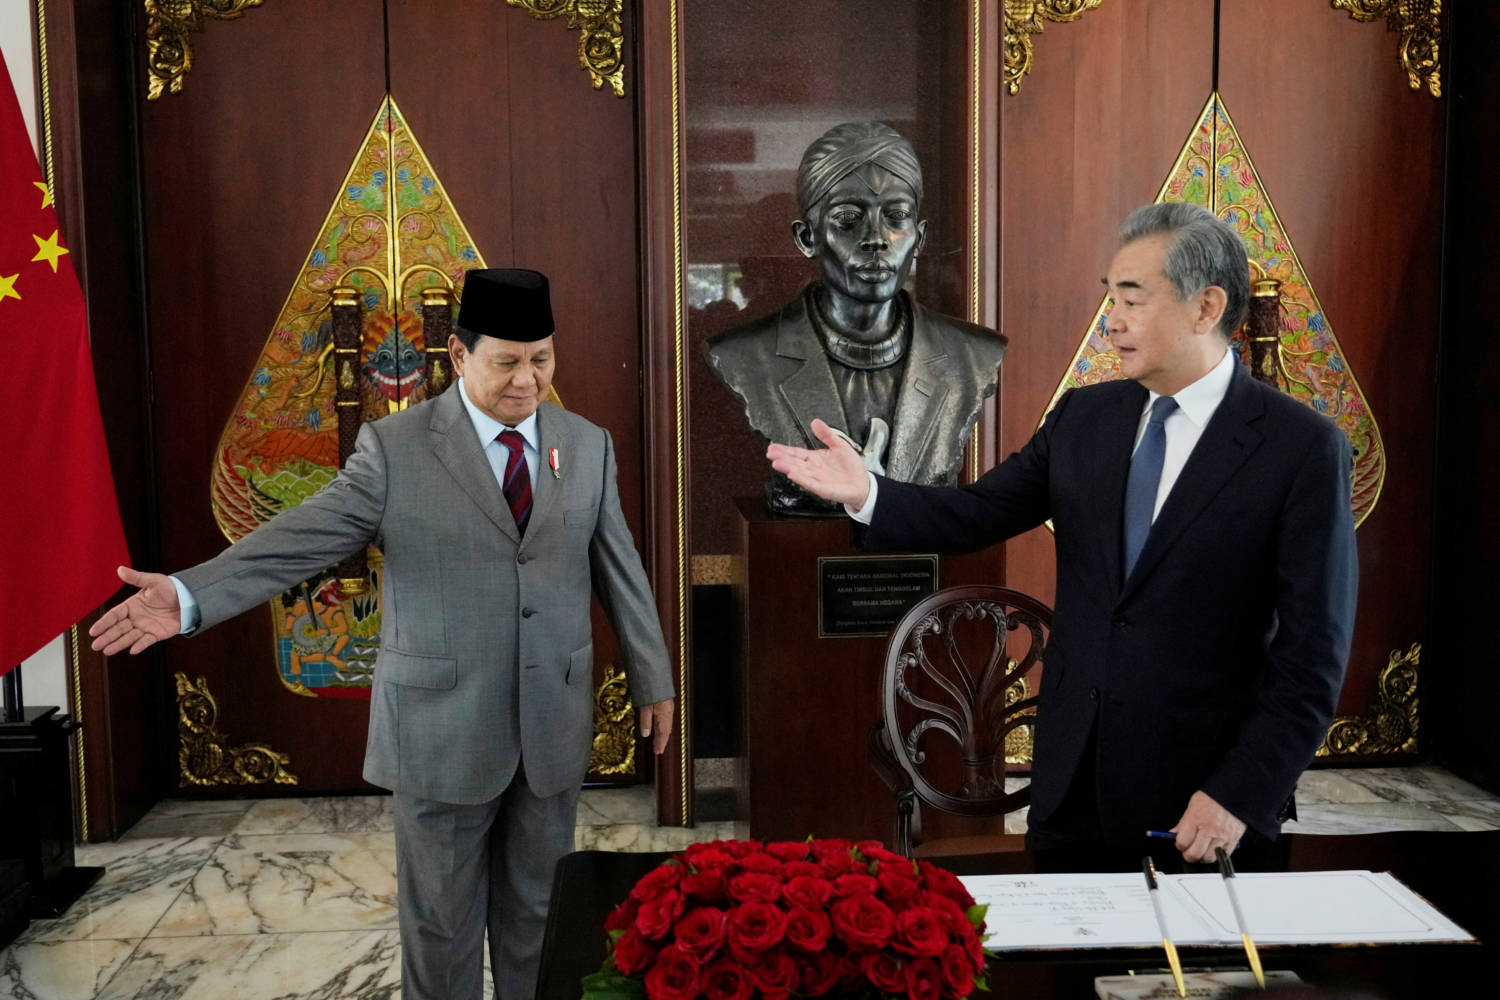 Indonesia's Defence Minister And President Elect Prabowo Subianto Meets Chinese Foreign Minister Wang Yi In Jakarta